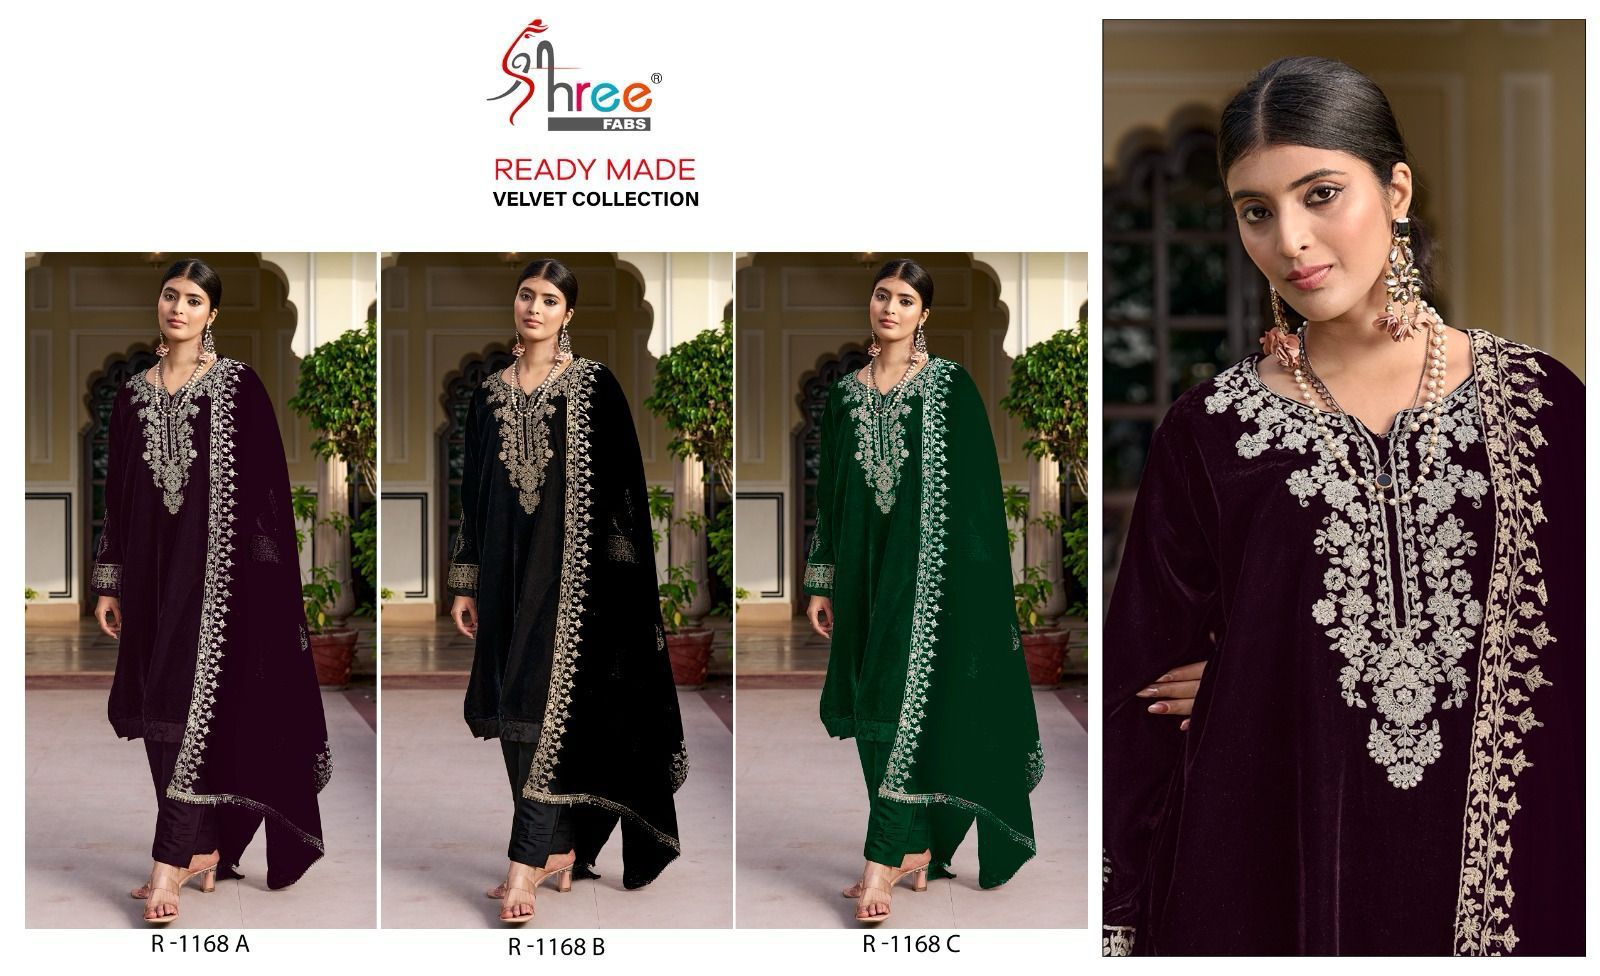 1168 Shree Fabs Embroidery Work Readymade Velvet Suits